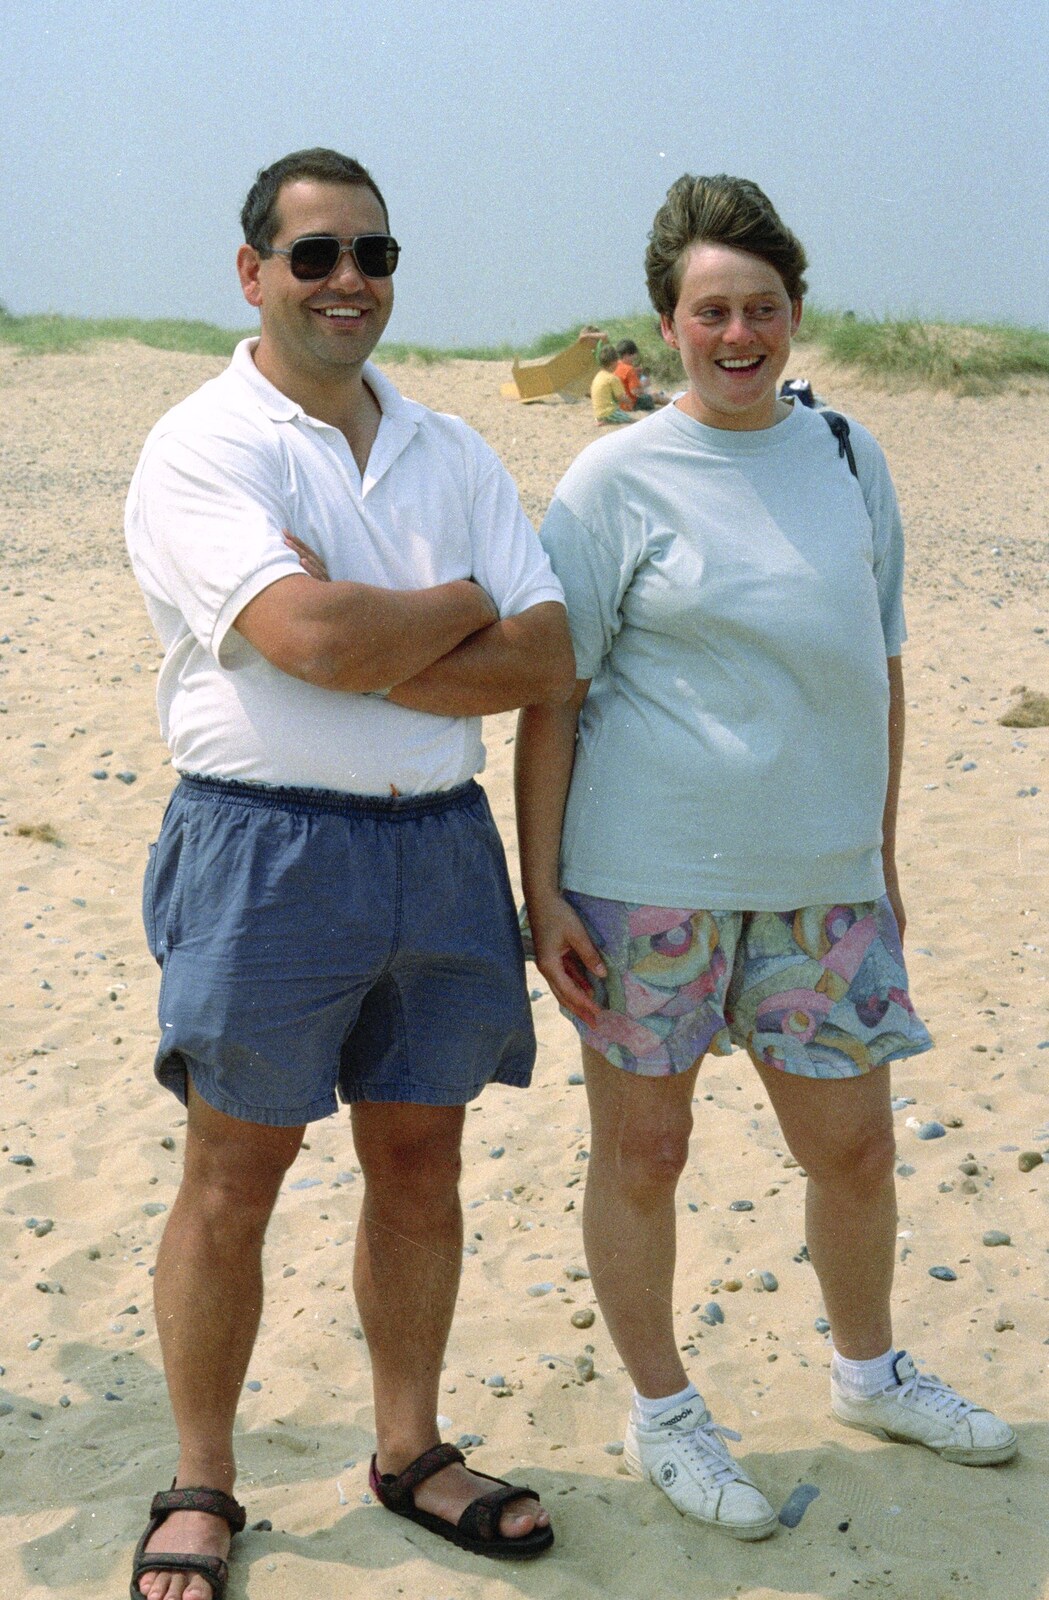 Roger and Pippa from BSCC at the Beach, Walberswick, Suffolk - 15th July 1997